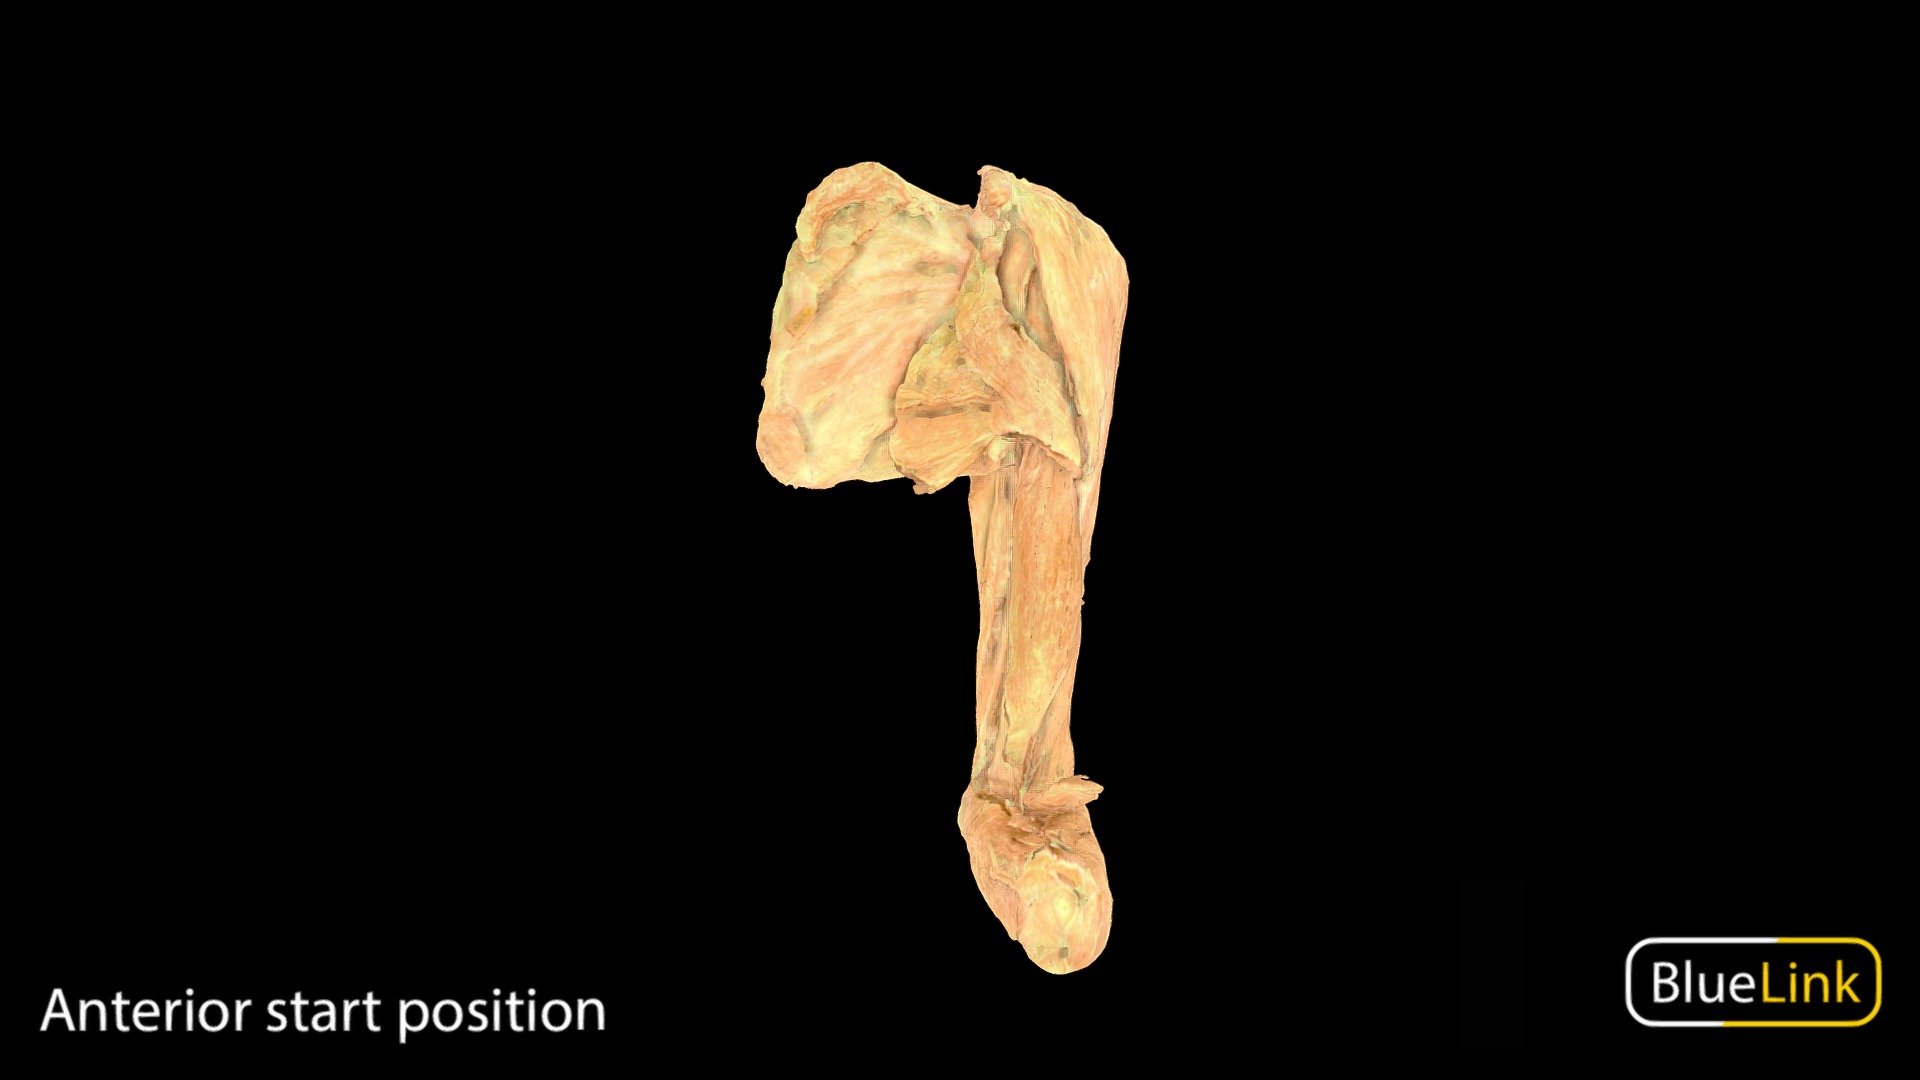 3D scan of the left upper arm

Captured with Einscan Pro

Captured and edited by: Will Gribbin

Copyright2019 BK Alsup &amp; GM Fox

ID 30068-U01 - Upper Limb - 3D model by Bluelink Anatomy - University of Michigan (@bluelinkanatomy) 3d model